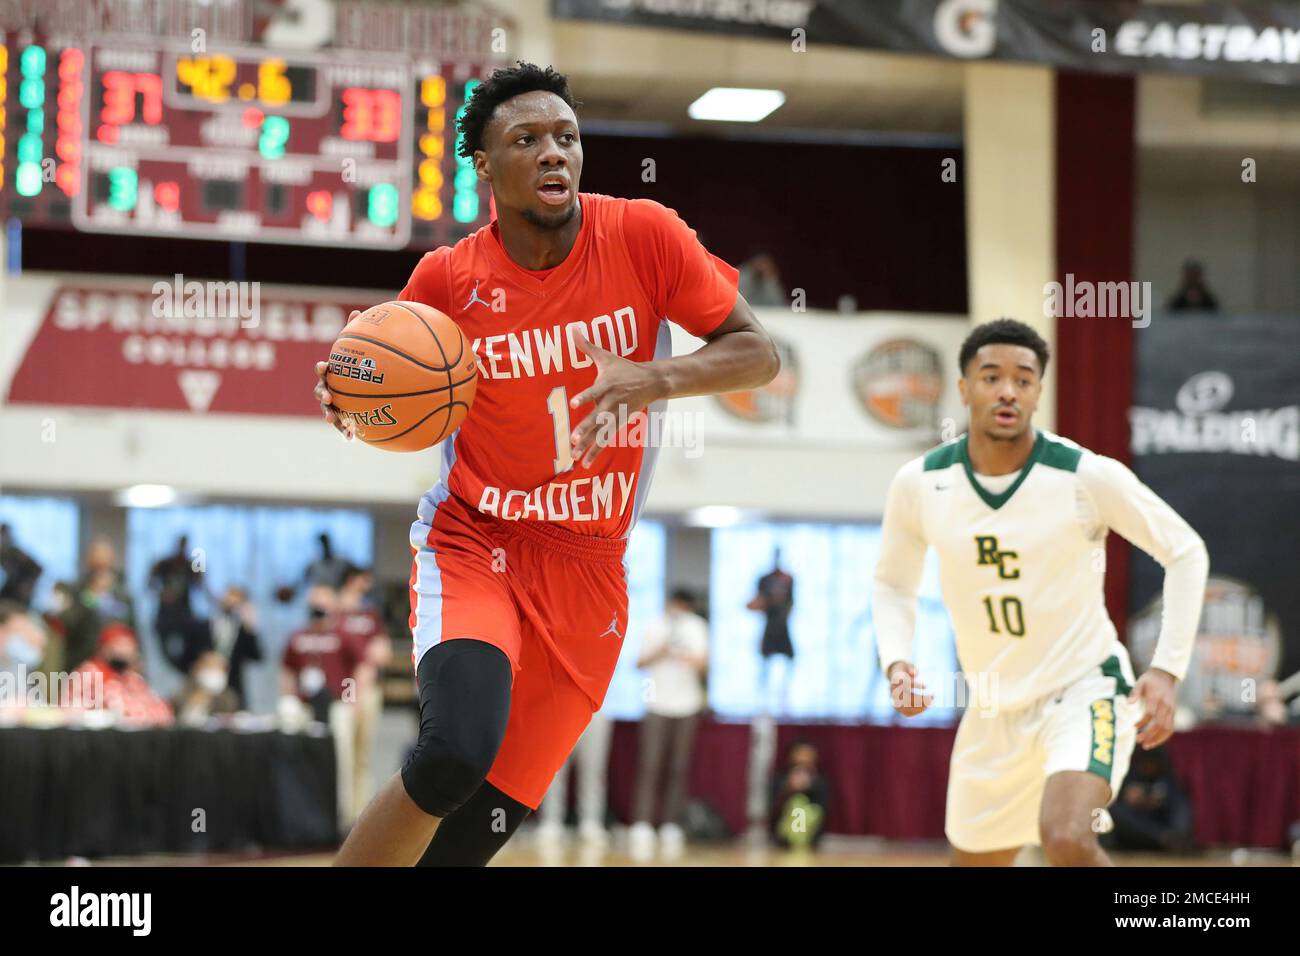 Kenwood's Davious Loury #1 in action against Roselle Catholic during a high  school basketball game at the Hoophall Classic, Sunday, January 16, 2022,  in Springfield, MA. (AP Photo/Gregory Payan Stock Photo - Alamy